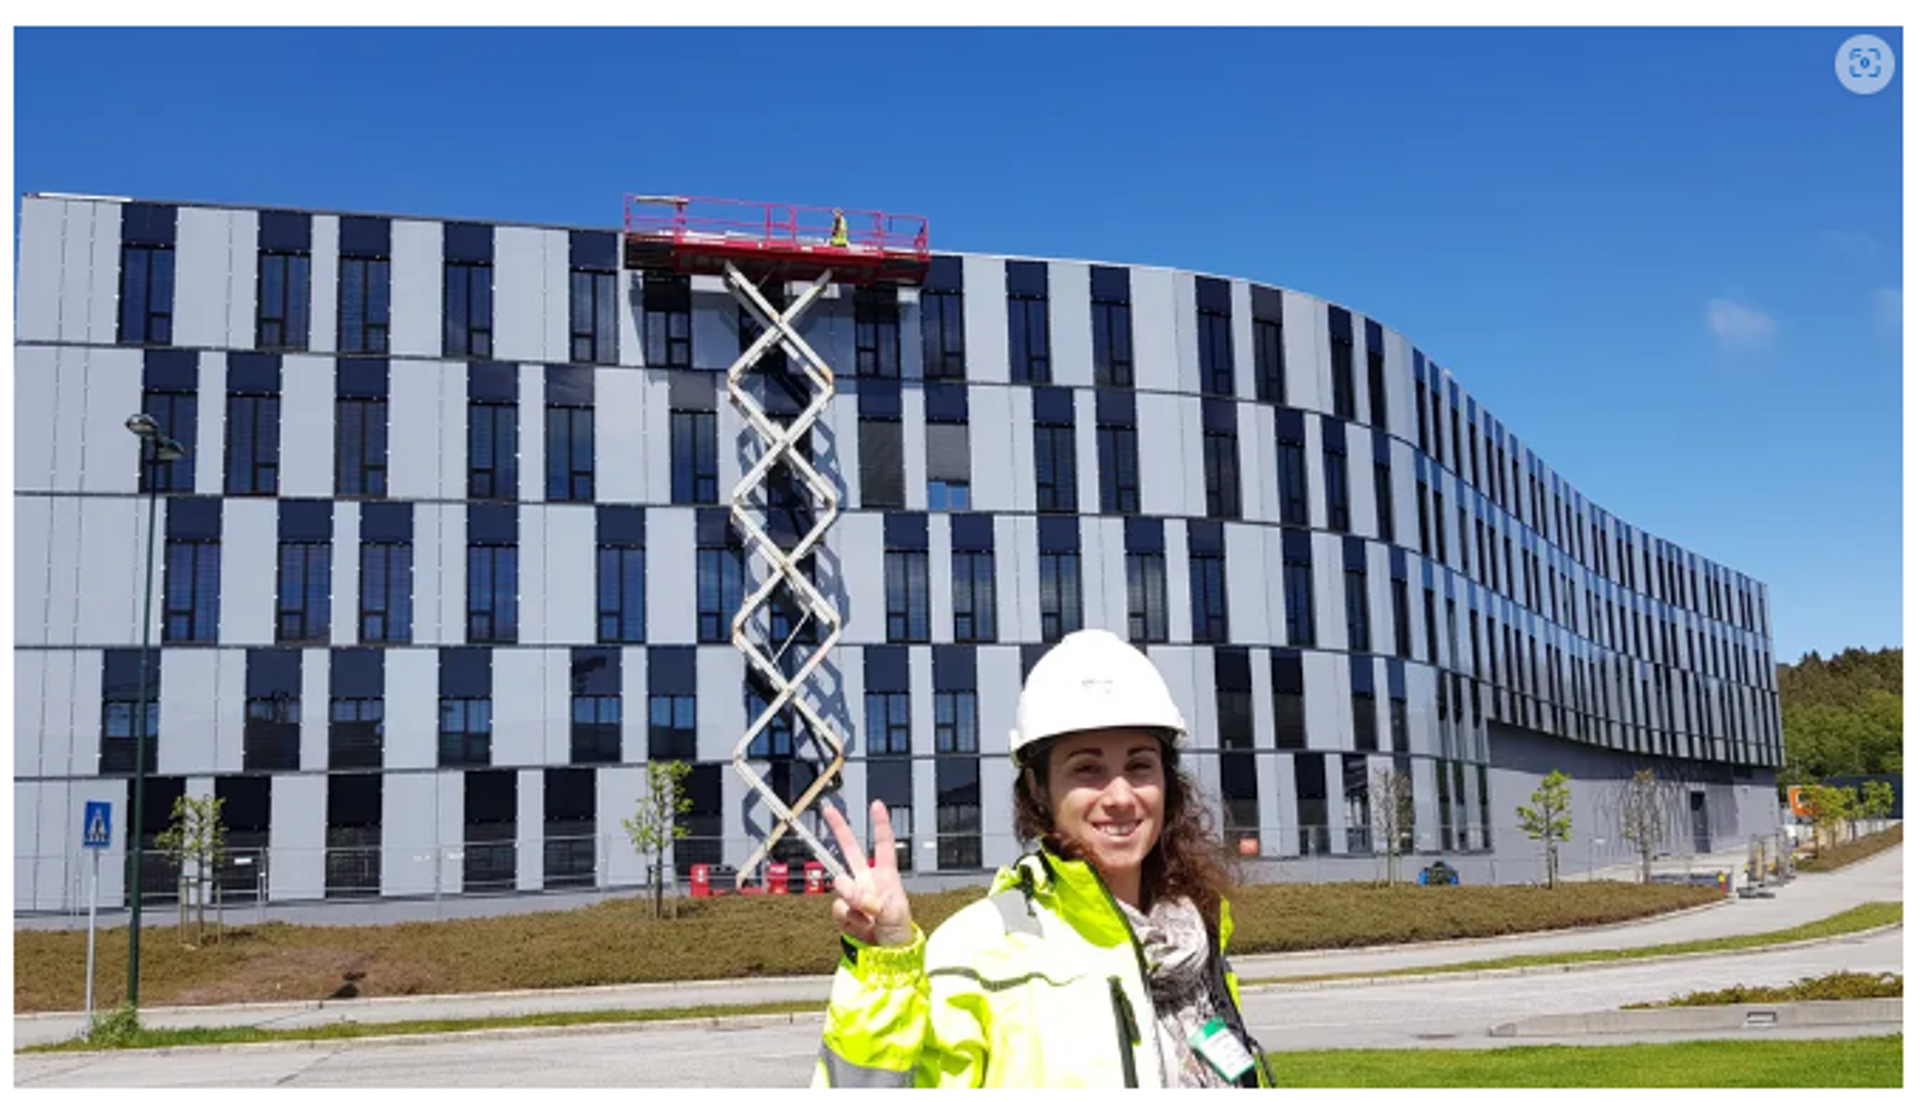 Woman construction worker standing in front of a commercial building with solar panels